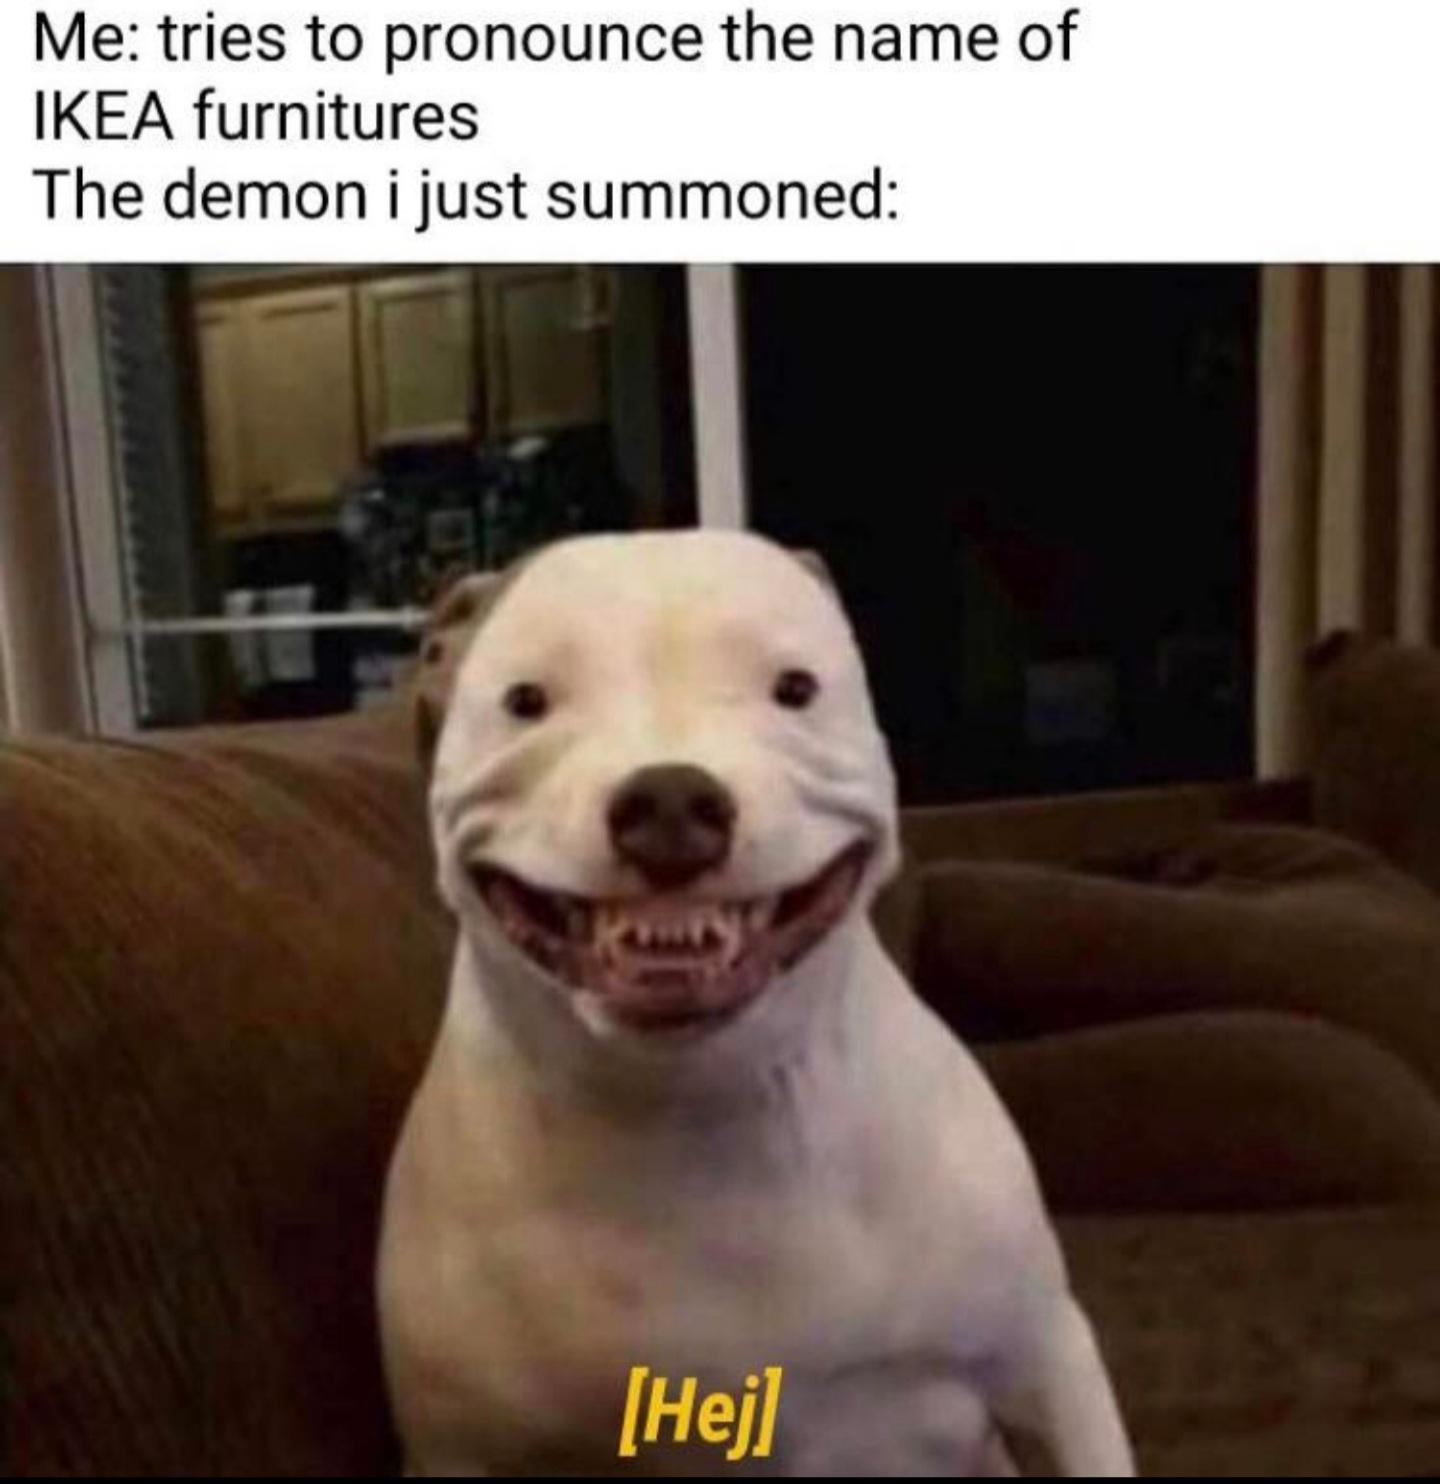 messes up in latin class - Me tries to pronounce the name of Ikea furnitures The demon i just summoned Hej